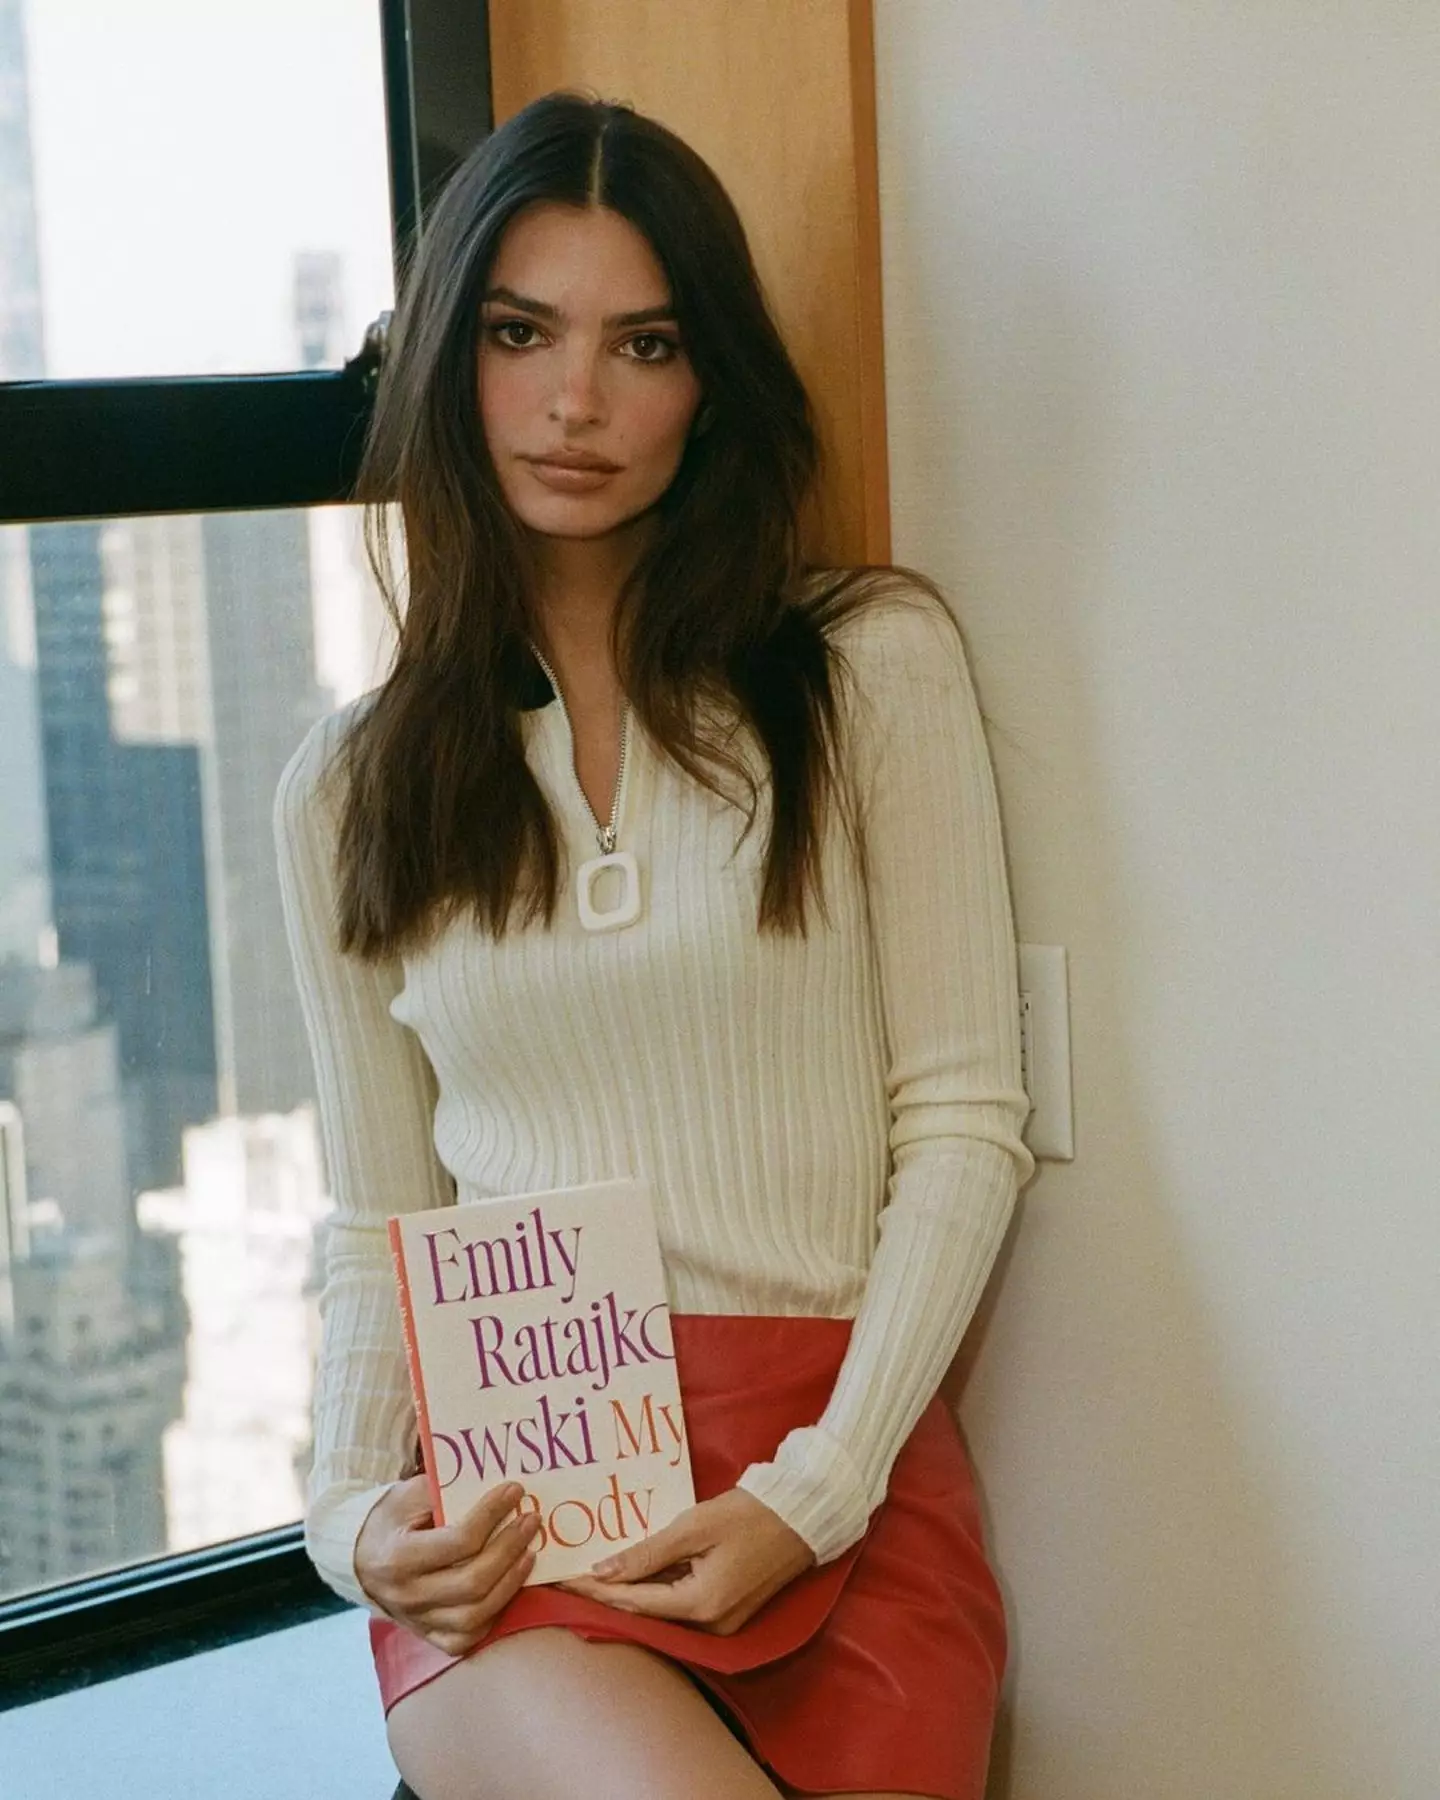 The claims were leaked from Ratajkowski's book.